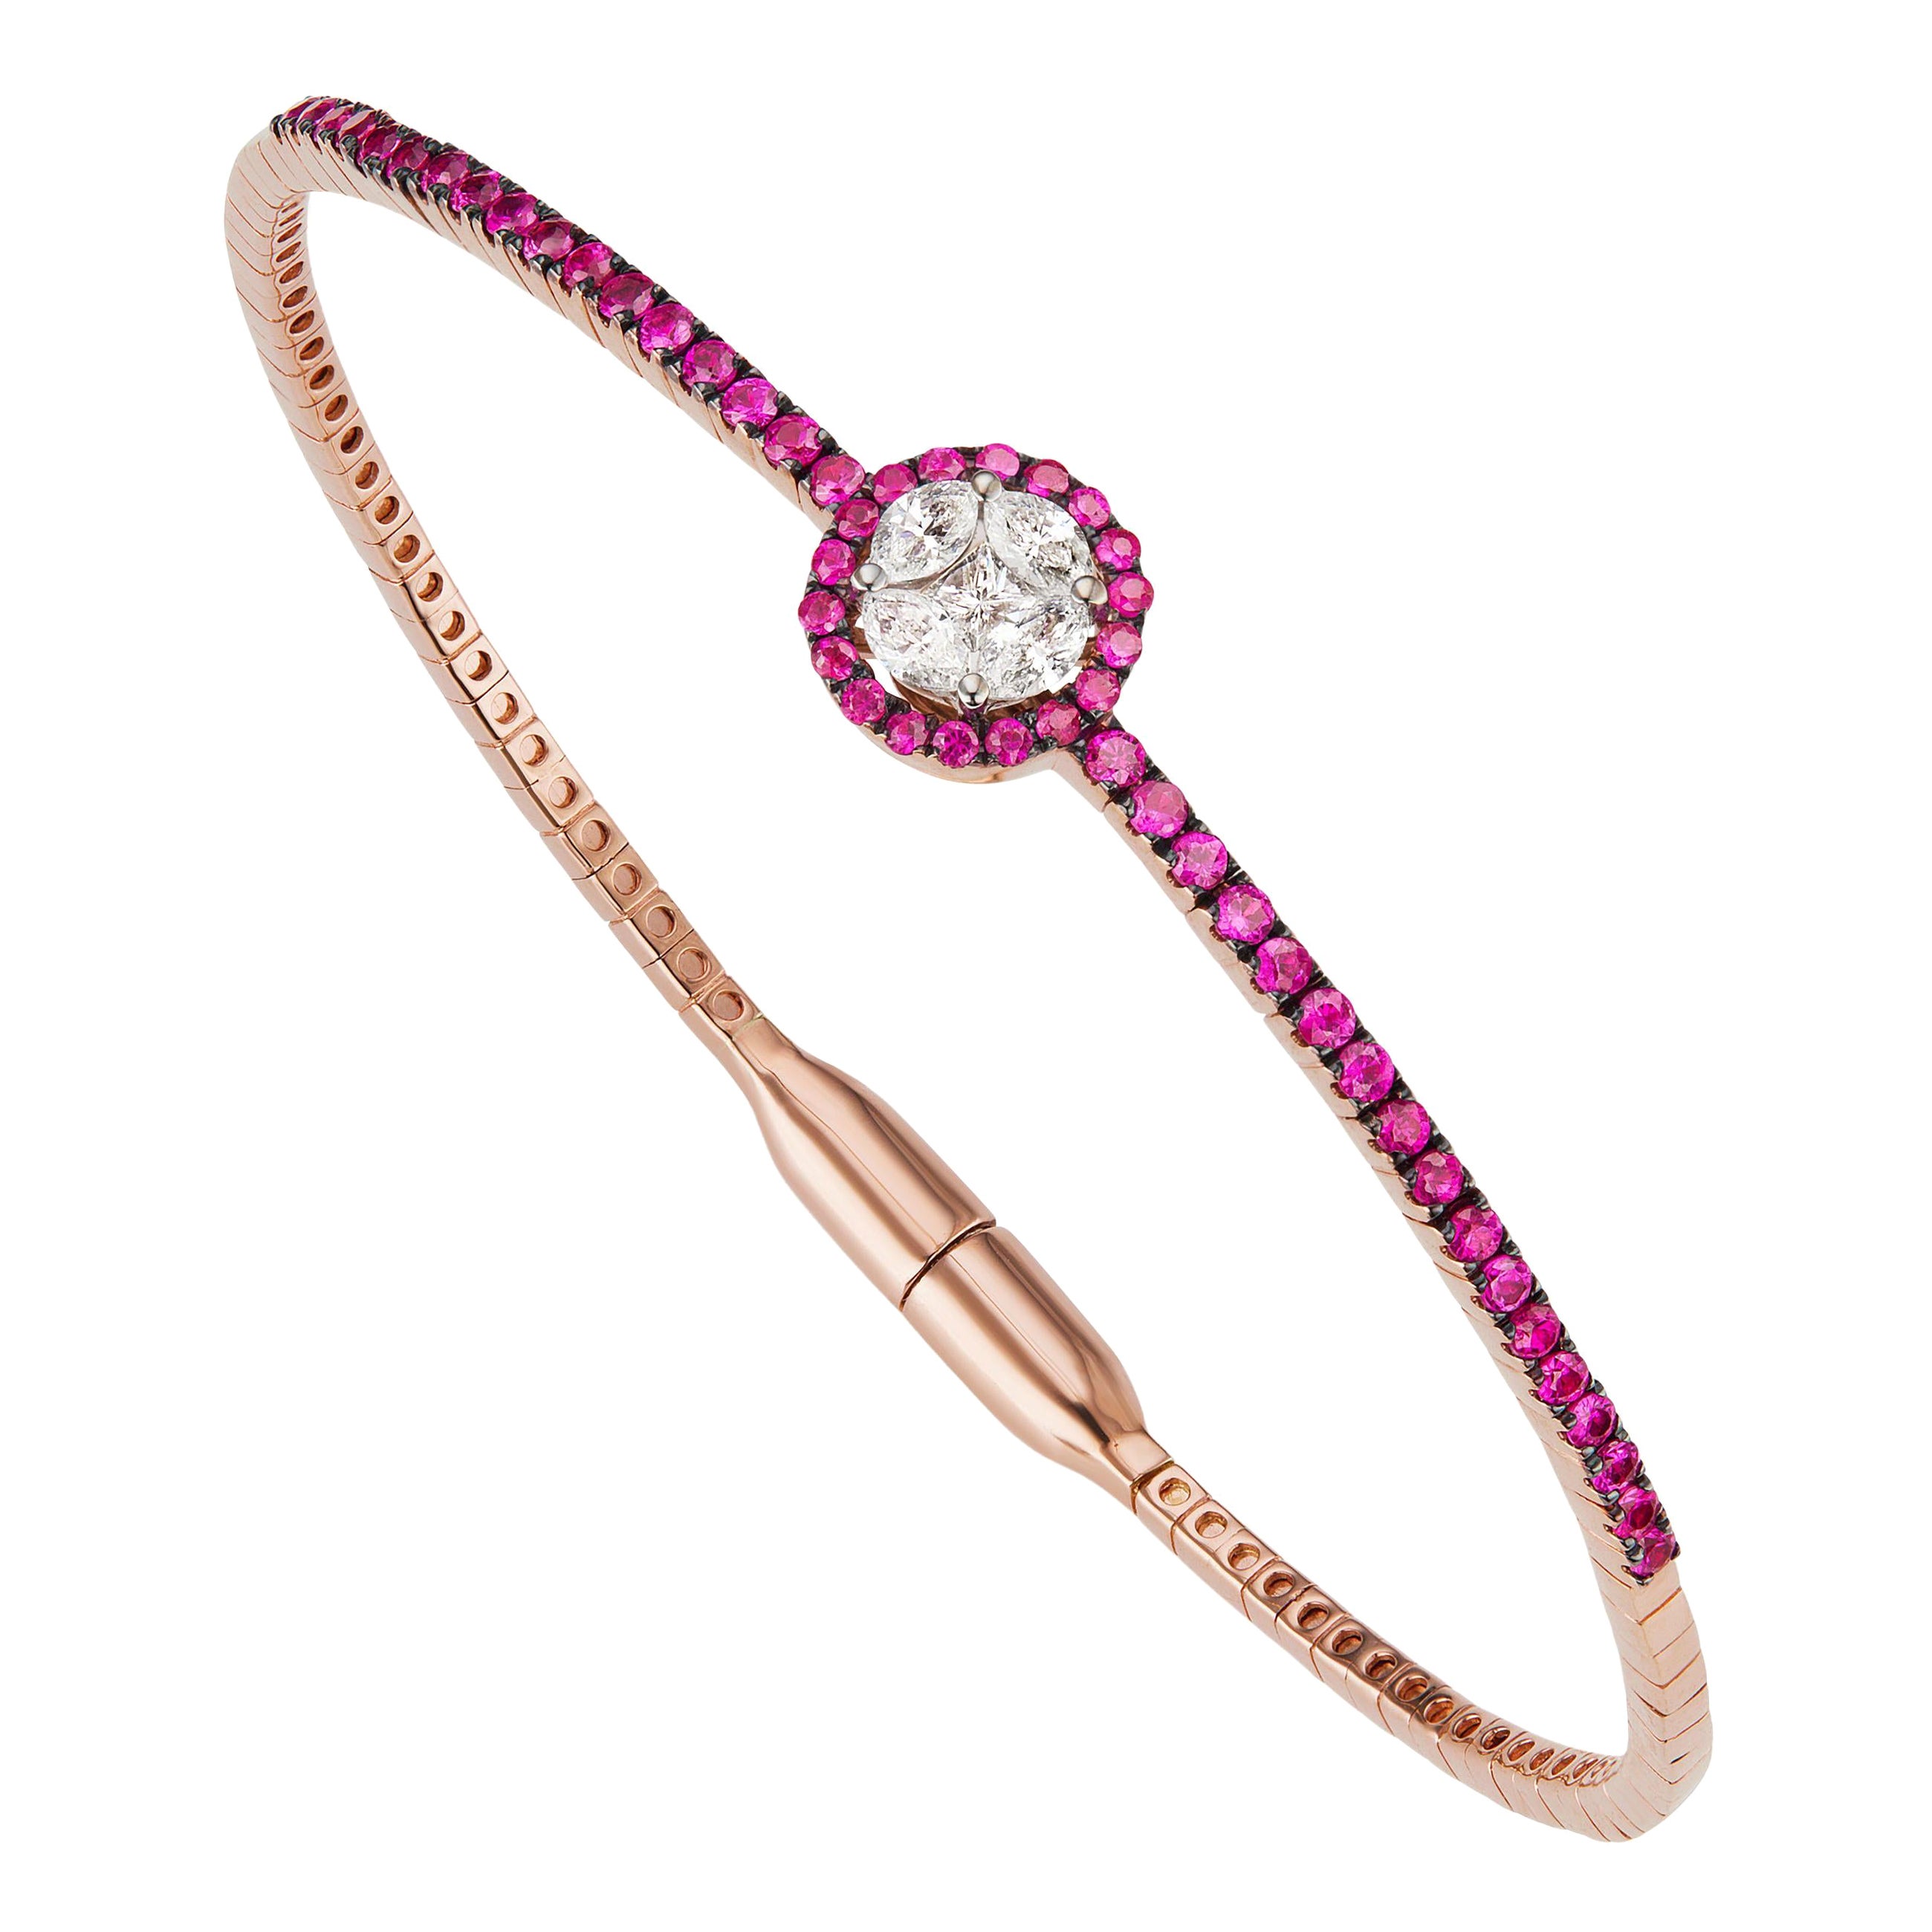 Gemistry 1.08cttw. Round Illusion Diamond and Ruby Bangle in 18k Rose Gold